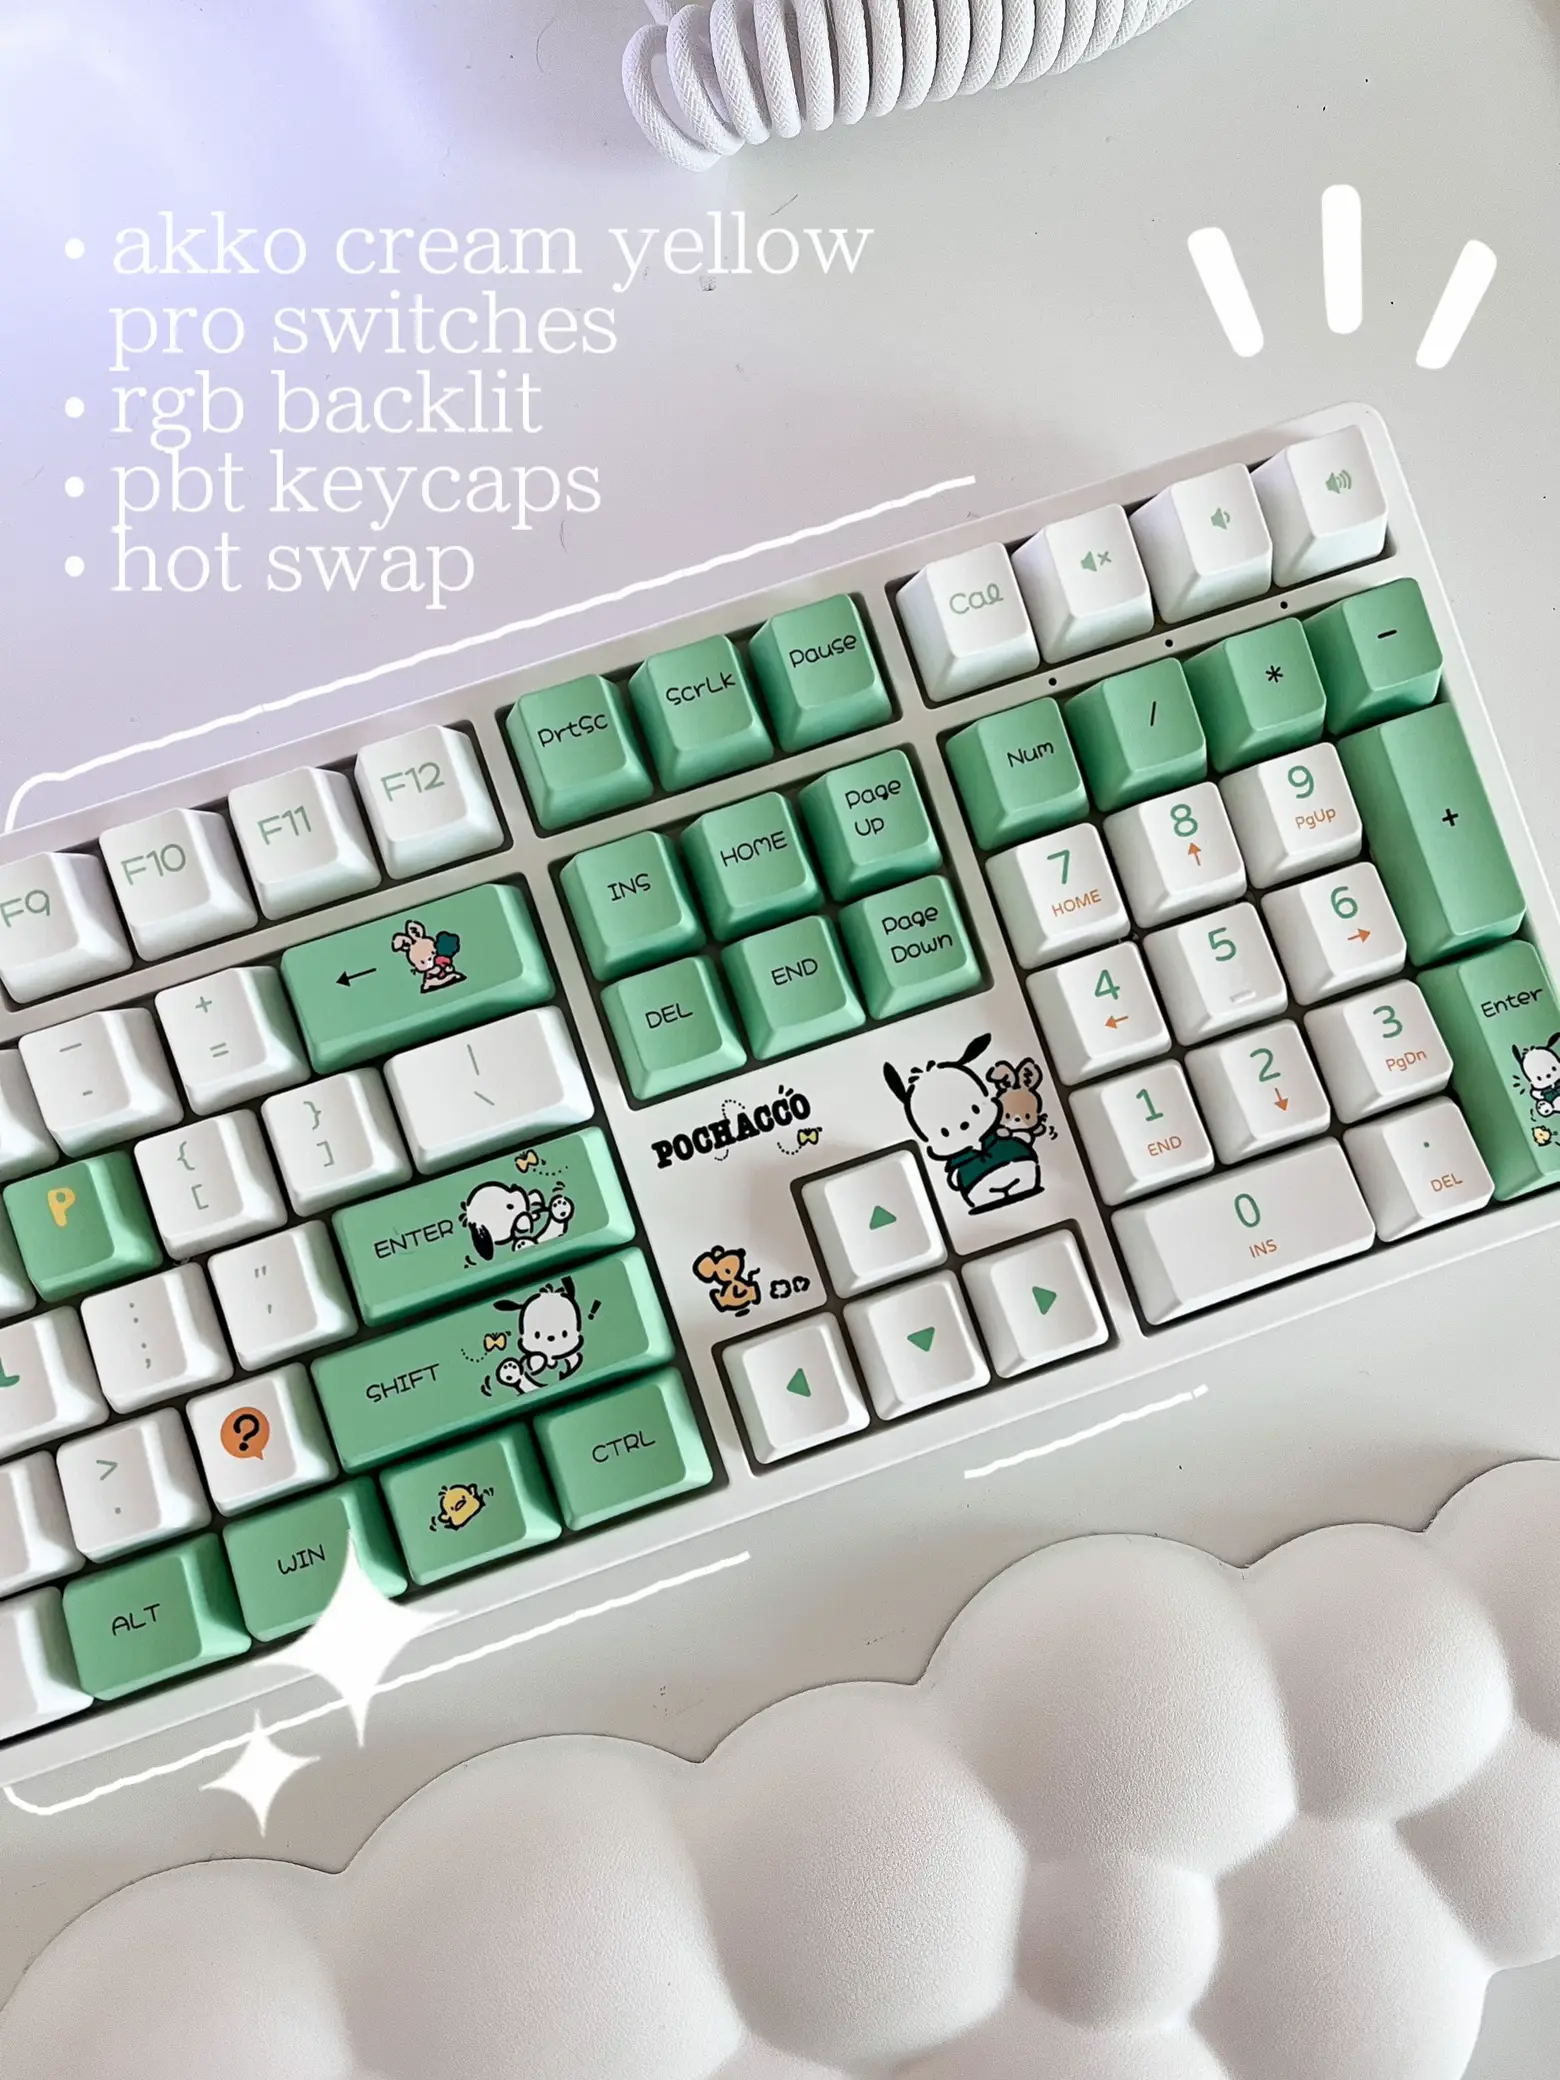 behold: my pochacco keyboard | Gallery posted by hana | Lemon8